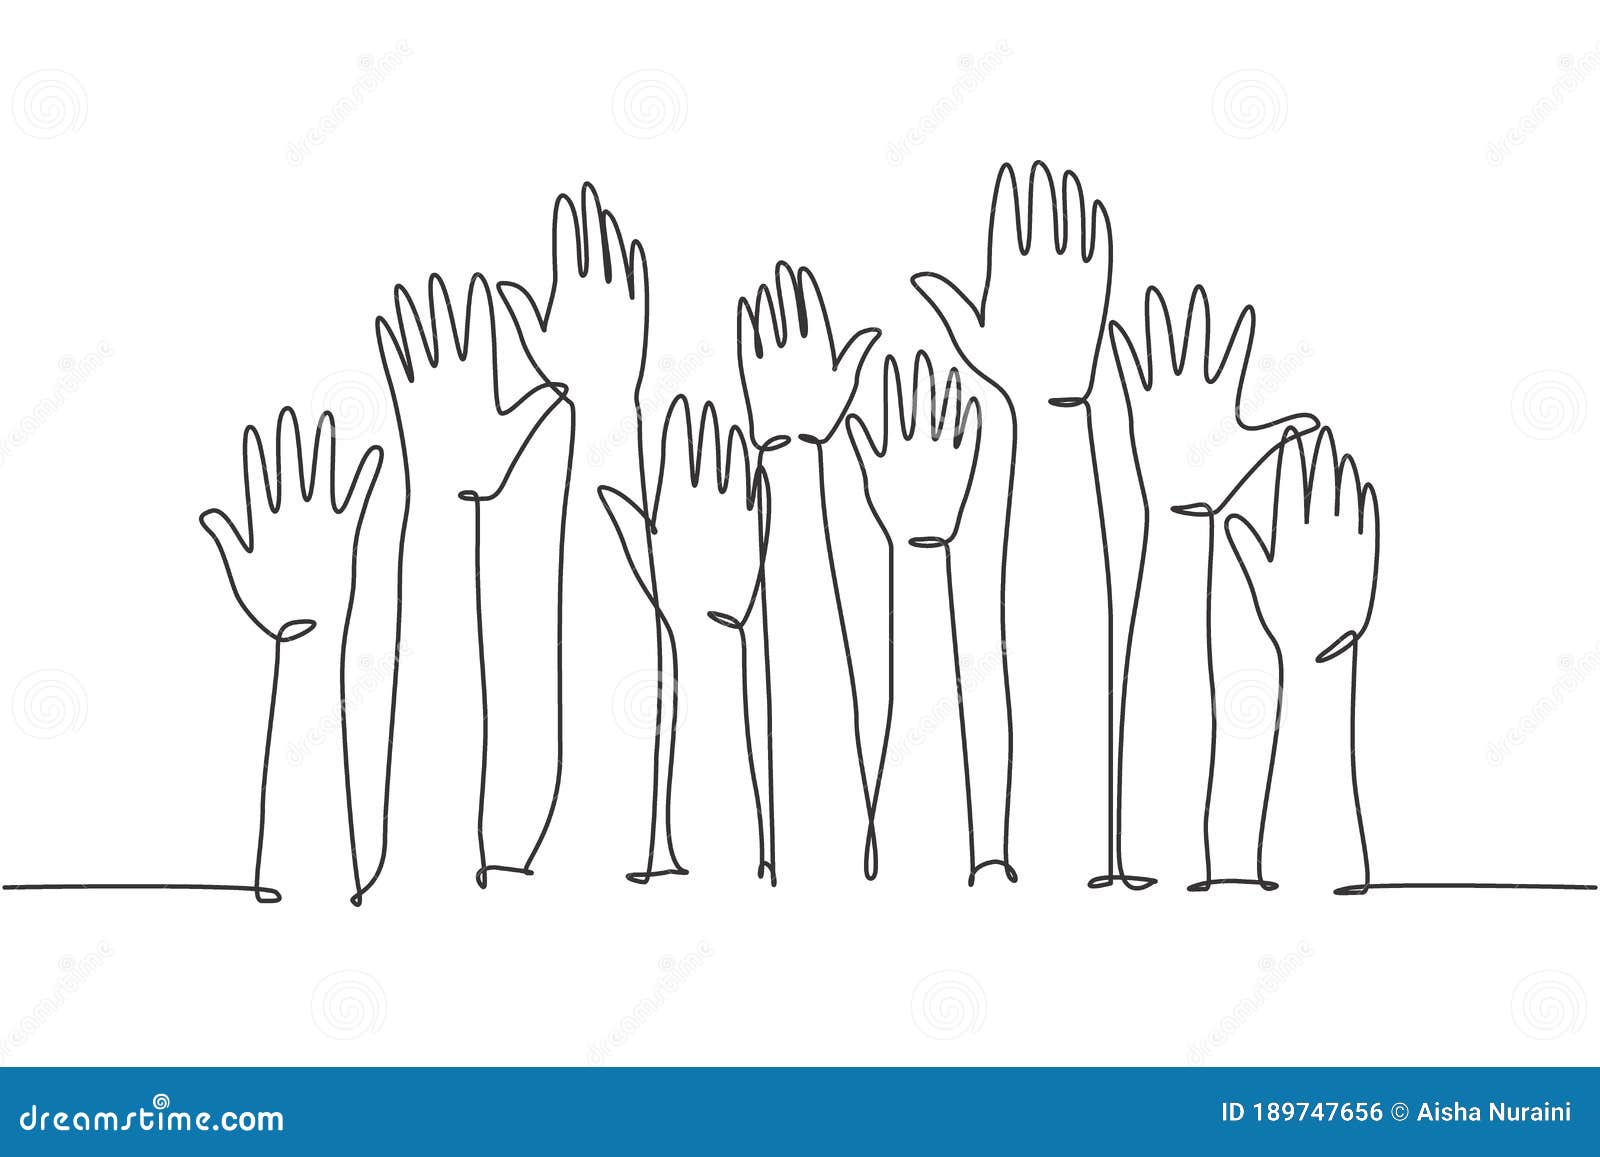 Hands Up Drawing Stock Illustrations 3 478 Hands Up Drawing Stock Illustrations Vectors Clipart Dreamstime